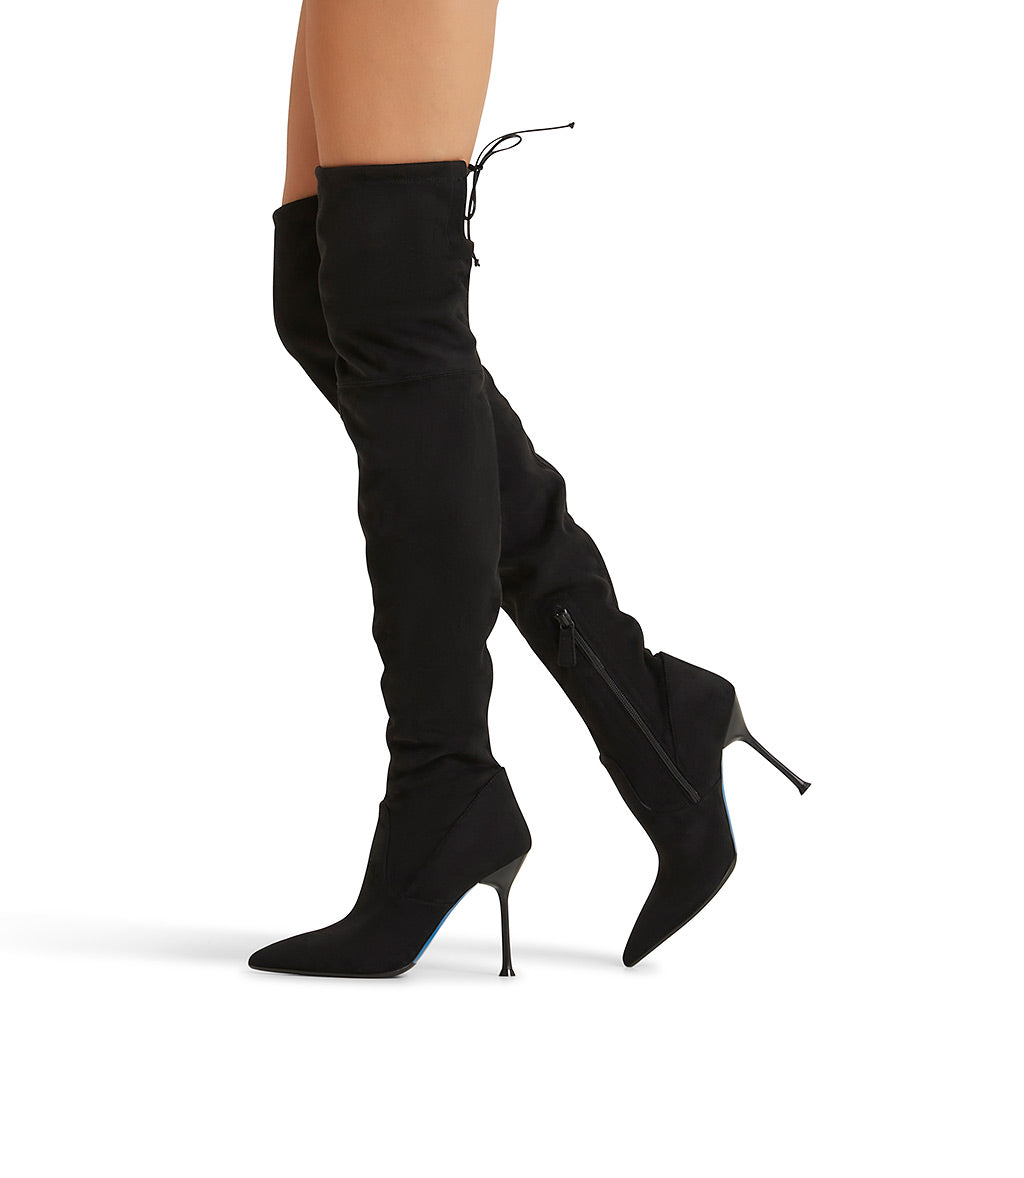 Black stretch suede over-the-knee boots